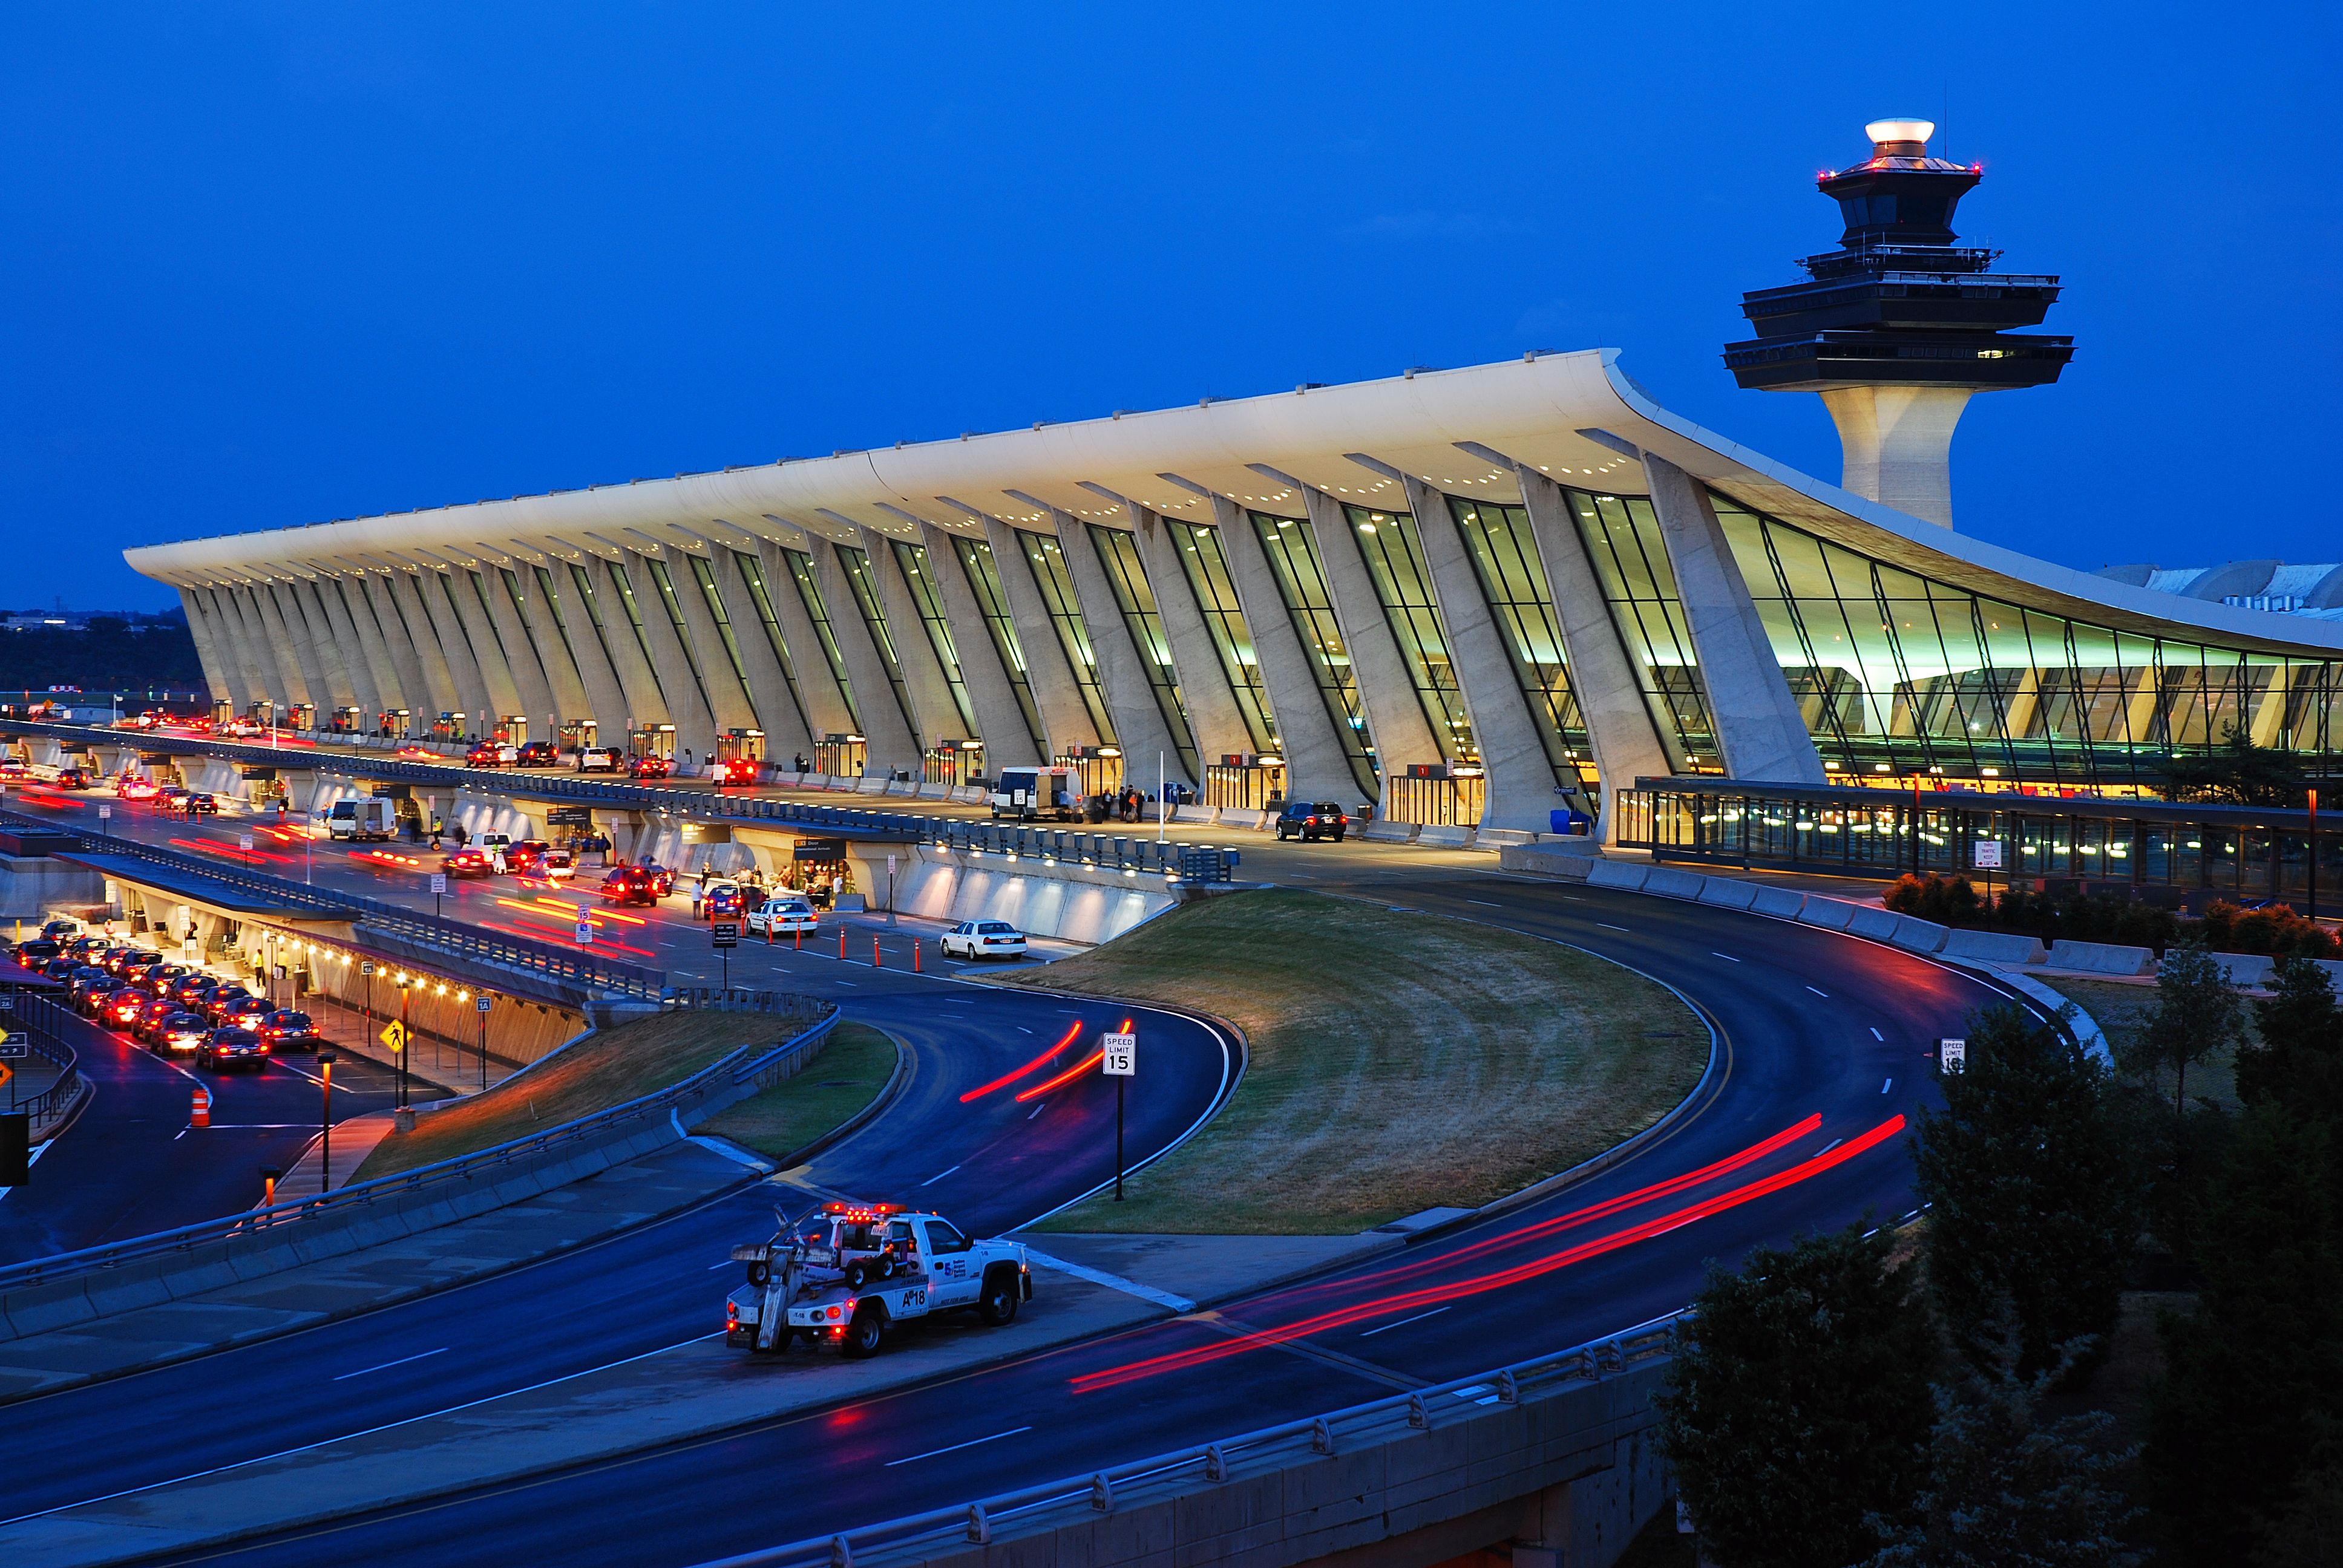 Outside the terminal building of Washington Dulles International airport.